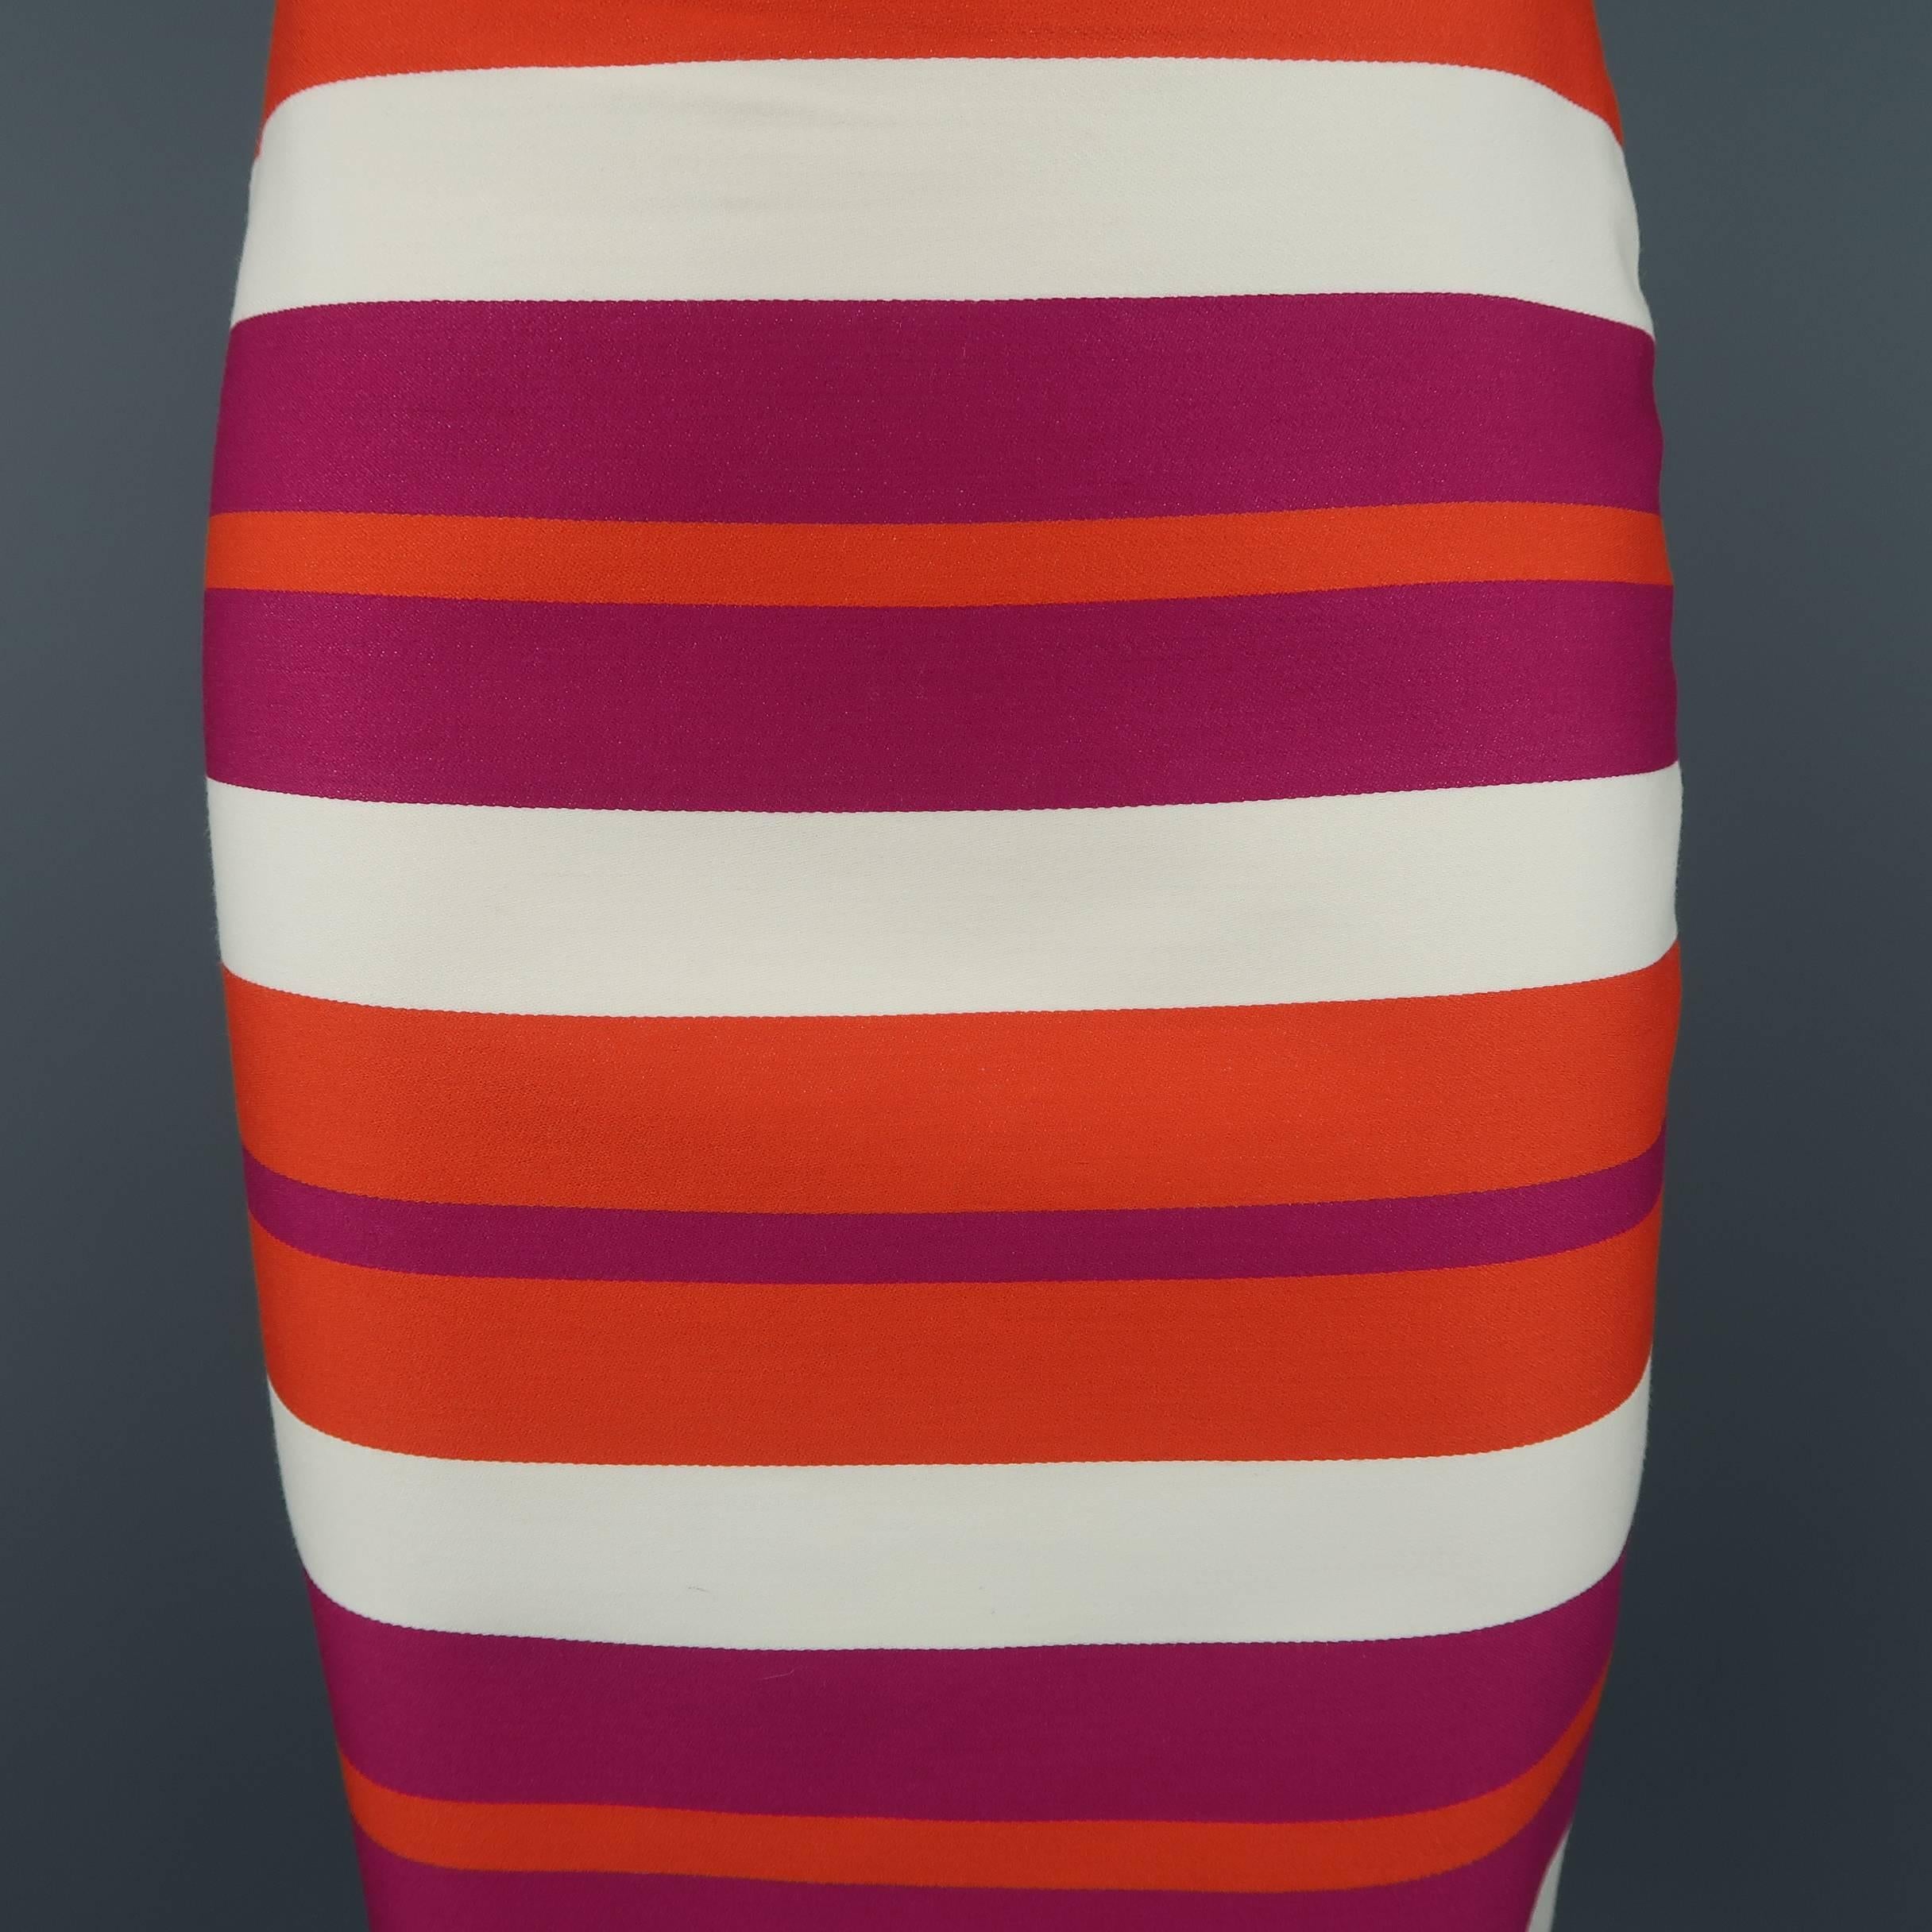 CELINE mini skirt comes in fuchsia, orange, and cream striped wool with a classic pencil skirt silhouette. Made in France.
 
Good Pre-Owned Condition.
Marked: FR 38
 
Measurements:
 
Waist: 27 in.
Hip: 36 in.
Length: 19 in.
